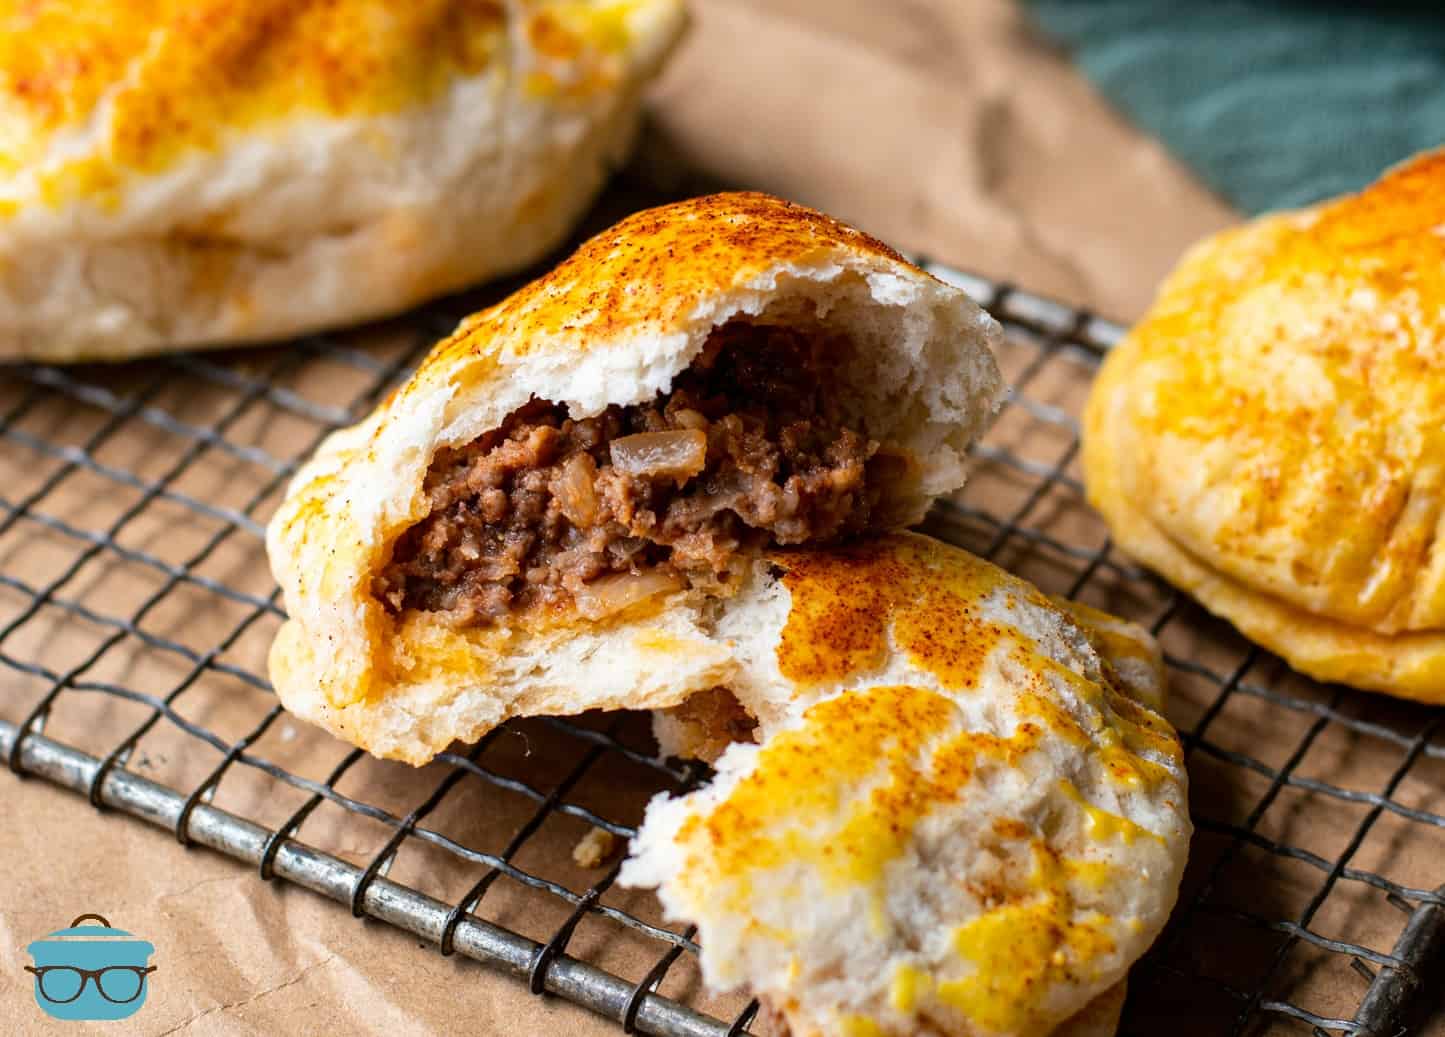 Beef and Potato Biscuit Hand Pies shown on a baking rack, one hand pie is open to show the ground beef inside.